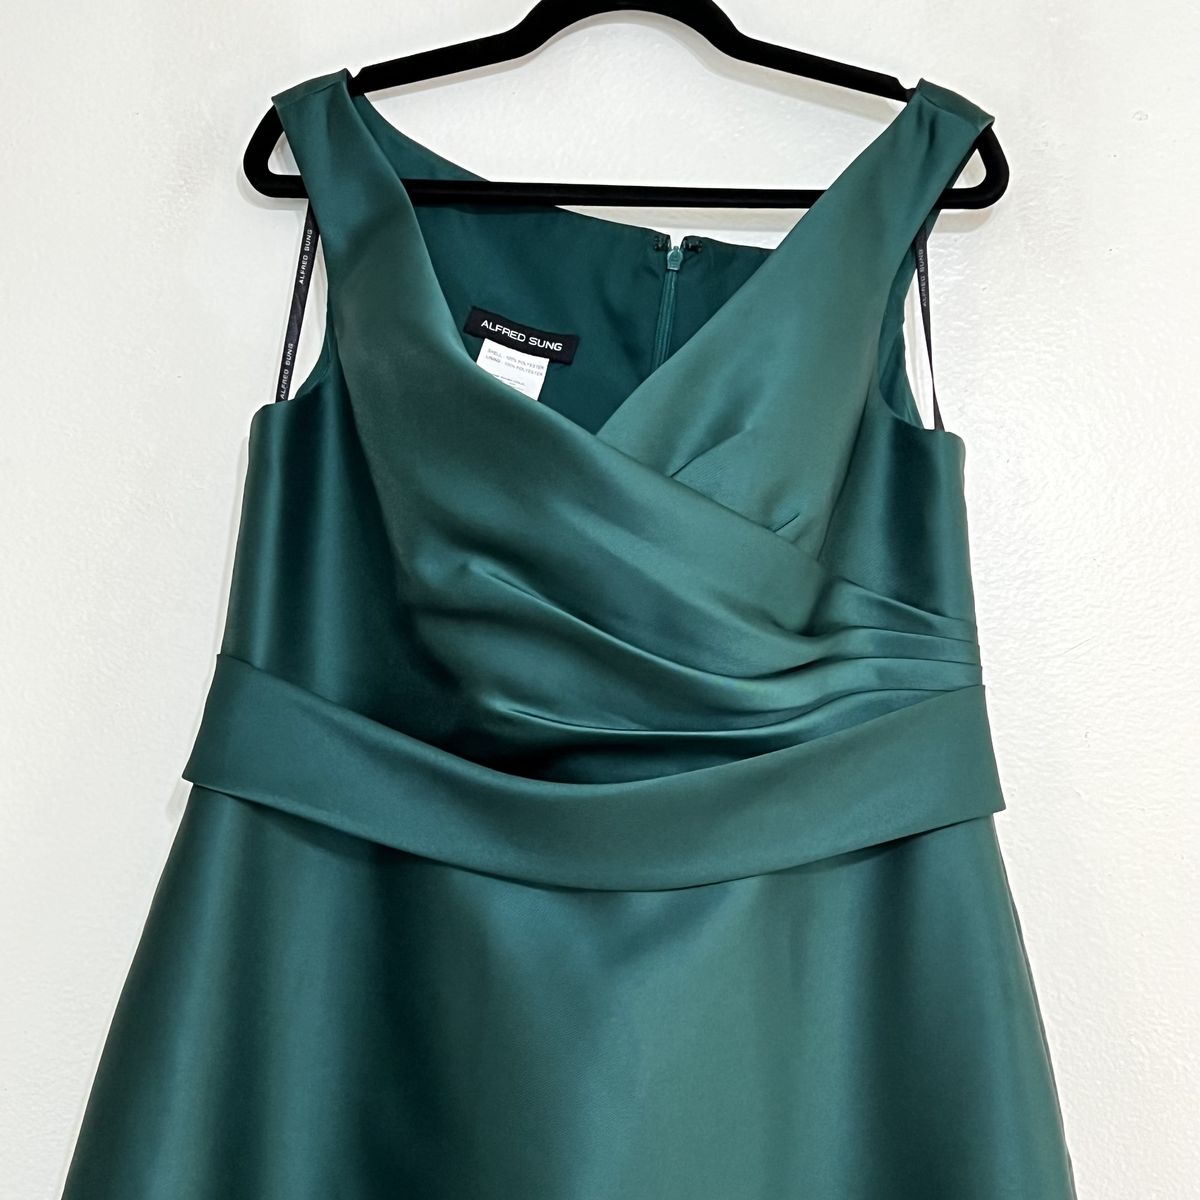 Style D811 Alfred Sung Size 4 Off The Shoulder Green A-line Dress on Queenly